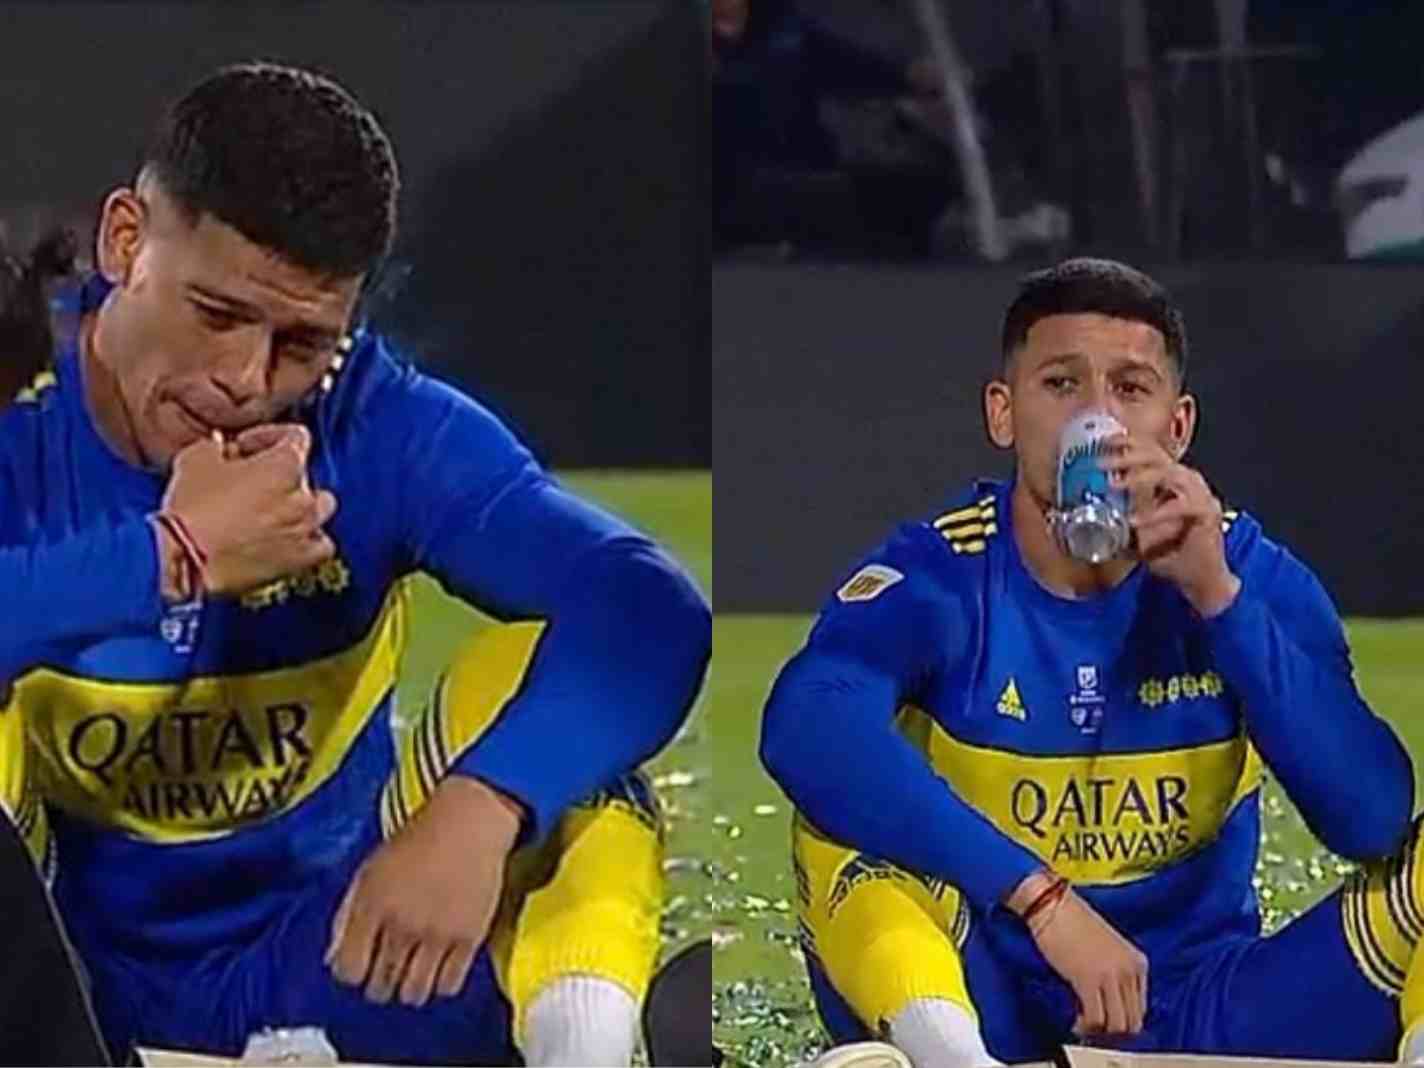 The photo shows Marcos Rojo smoking a joint and drinking beer after Boca Juniors title win.